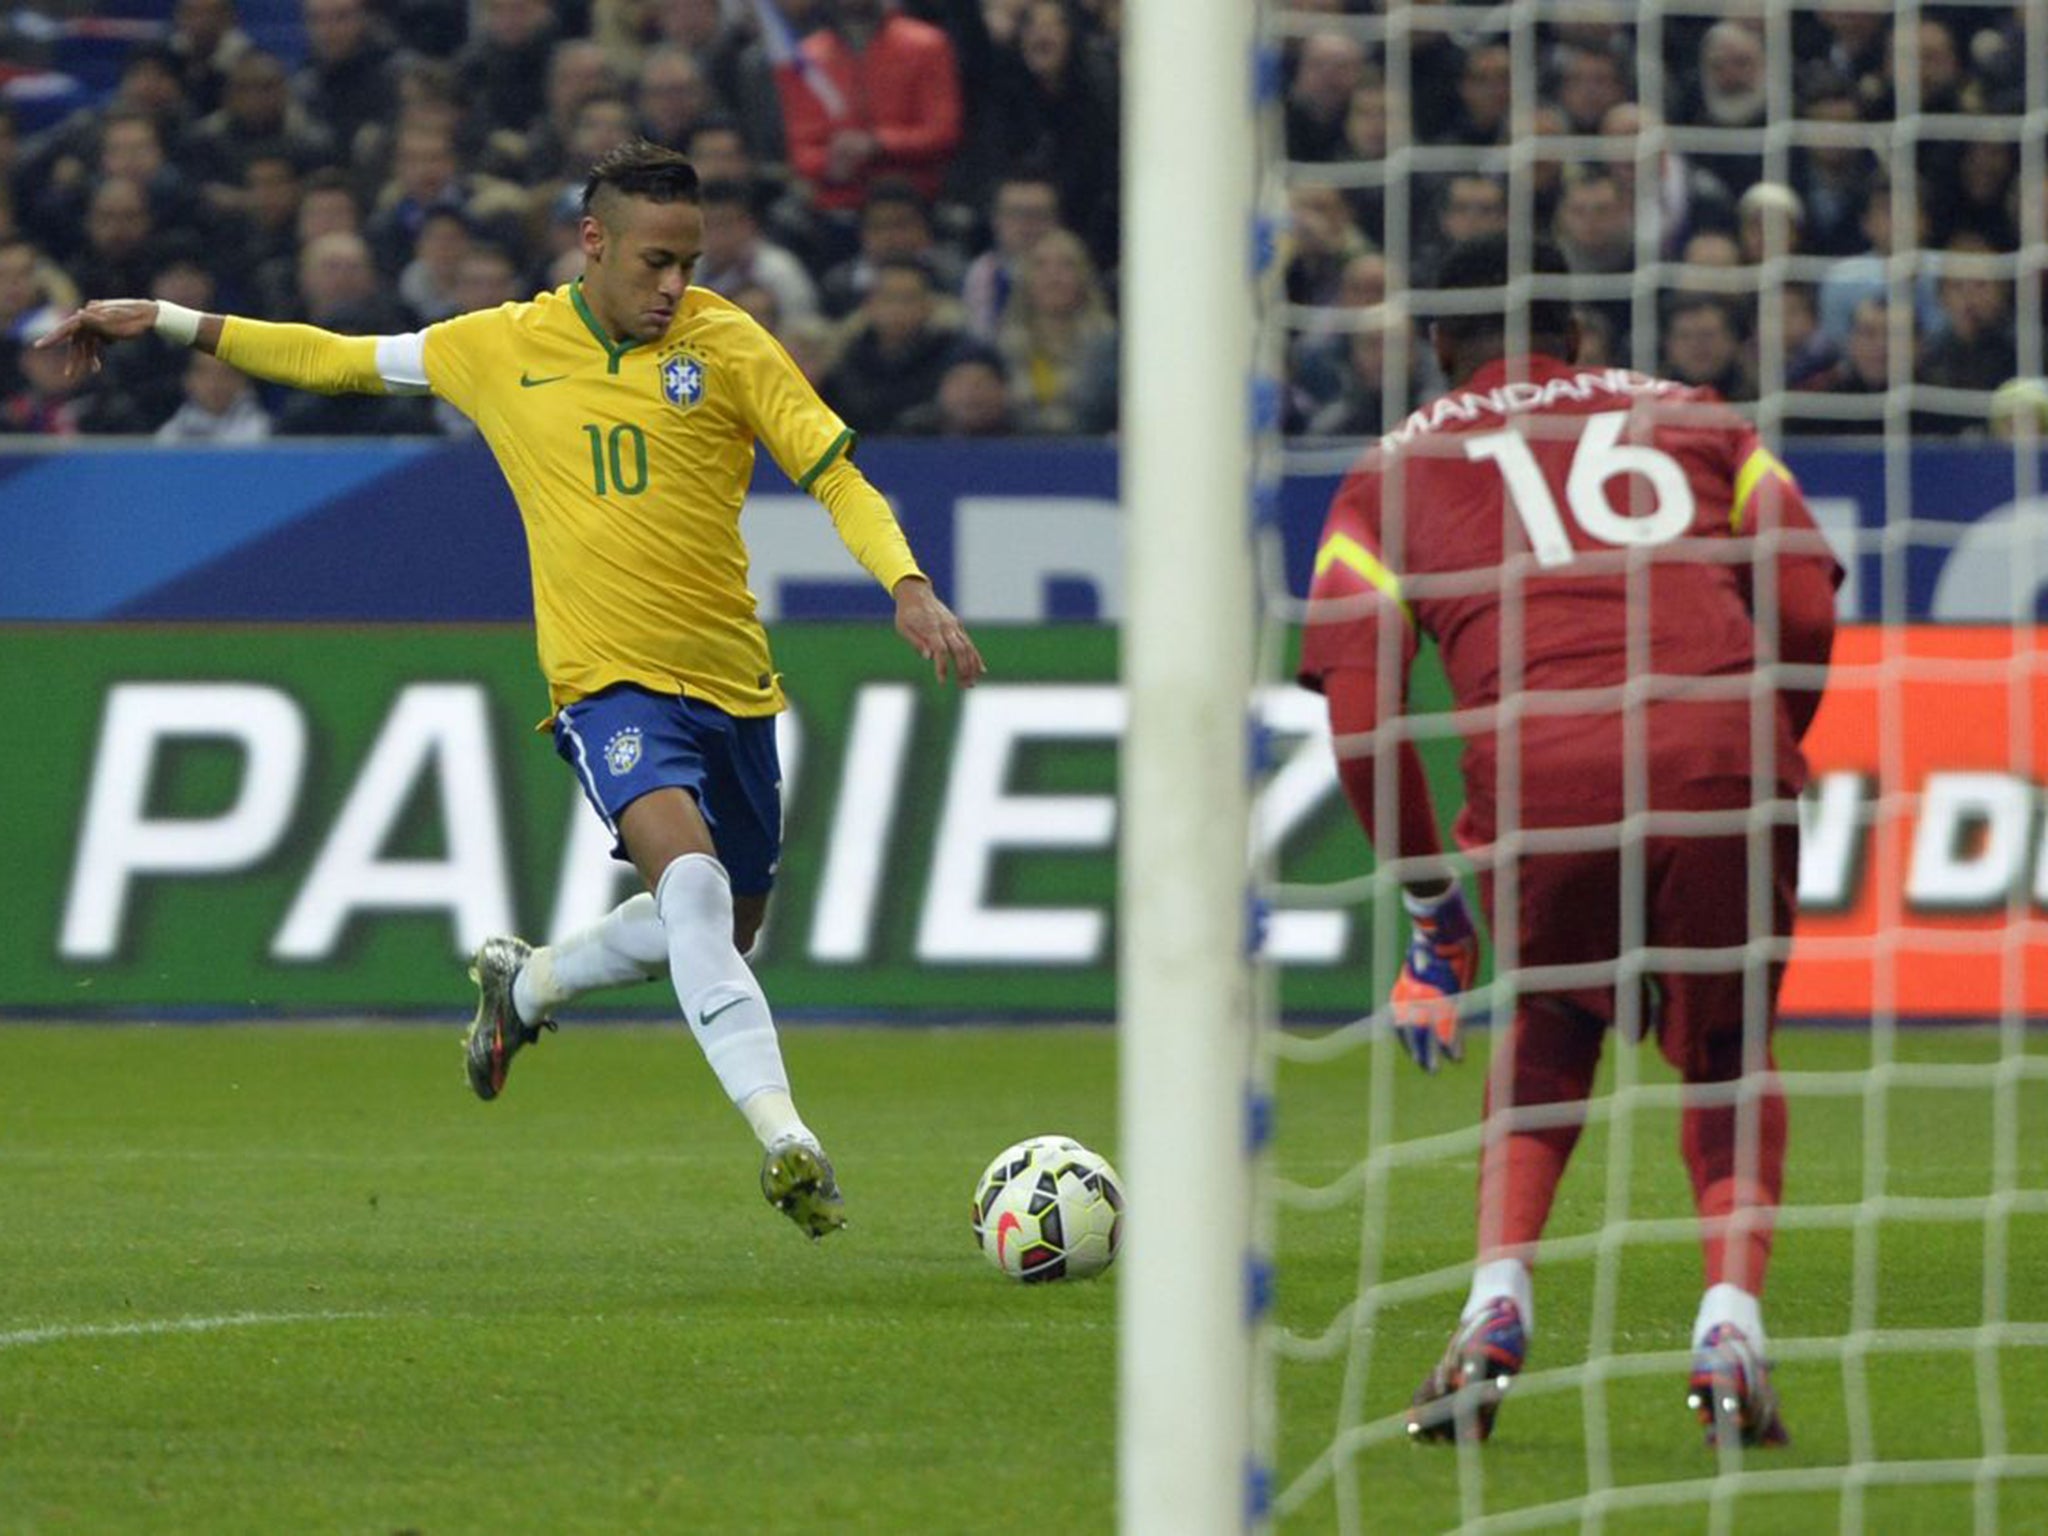 Road to redemption: Neymar’s goals have eased Brazil’s summer blues